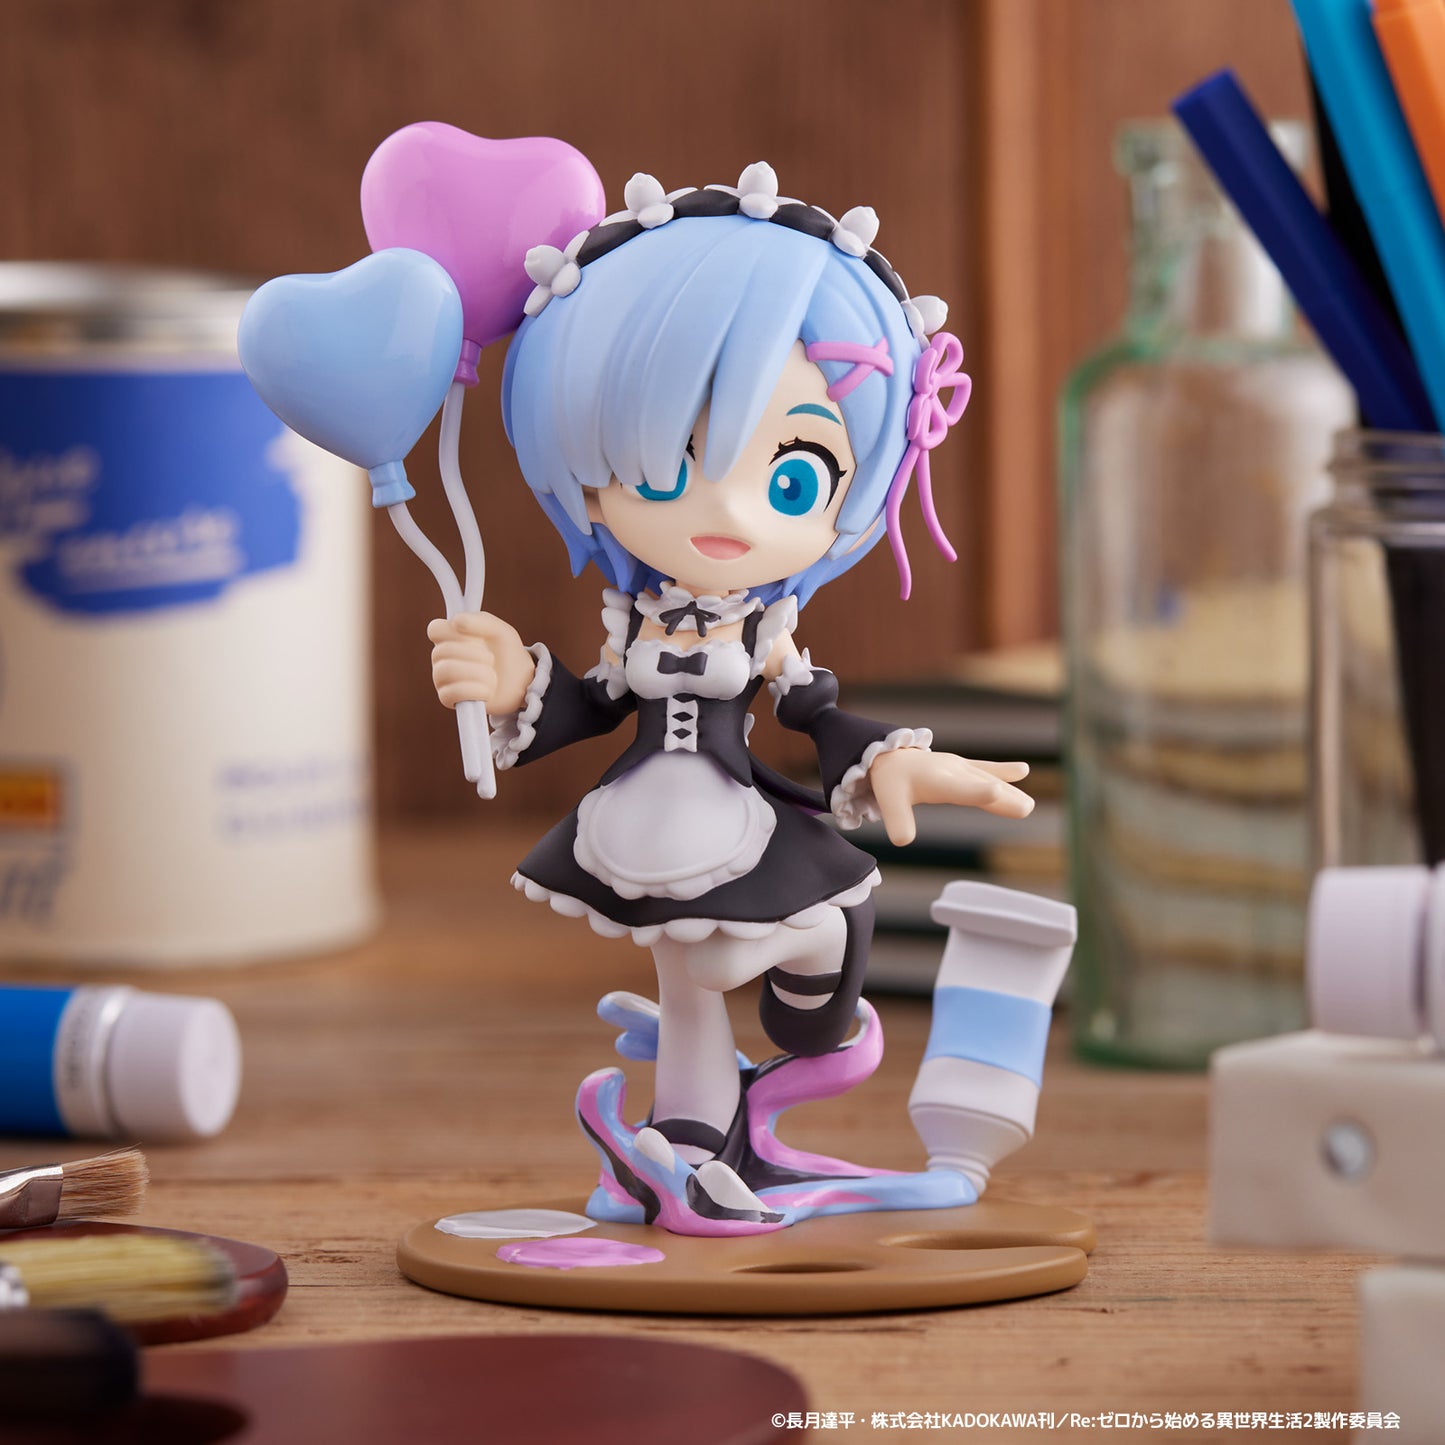 PalVerse Pale. "Re:ZERO -Starting Life in Another World-" Rem | animota